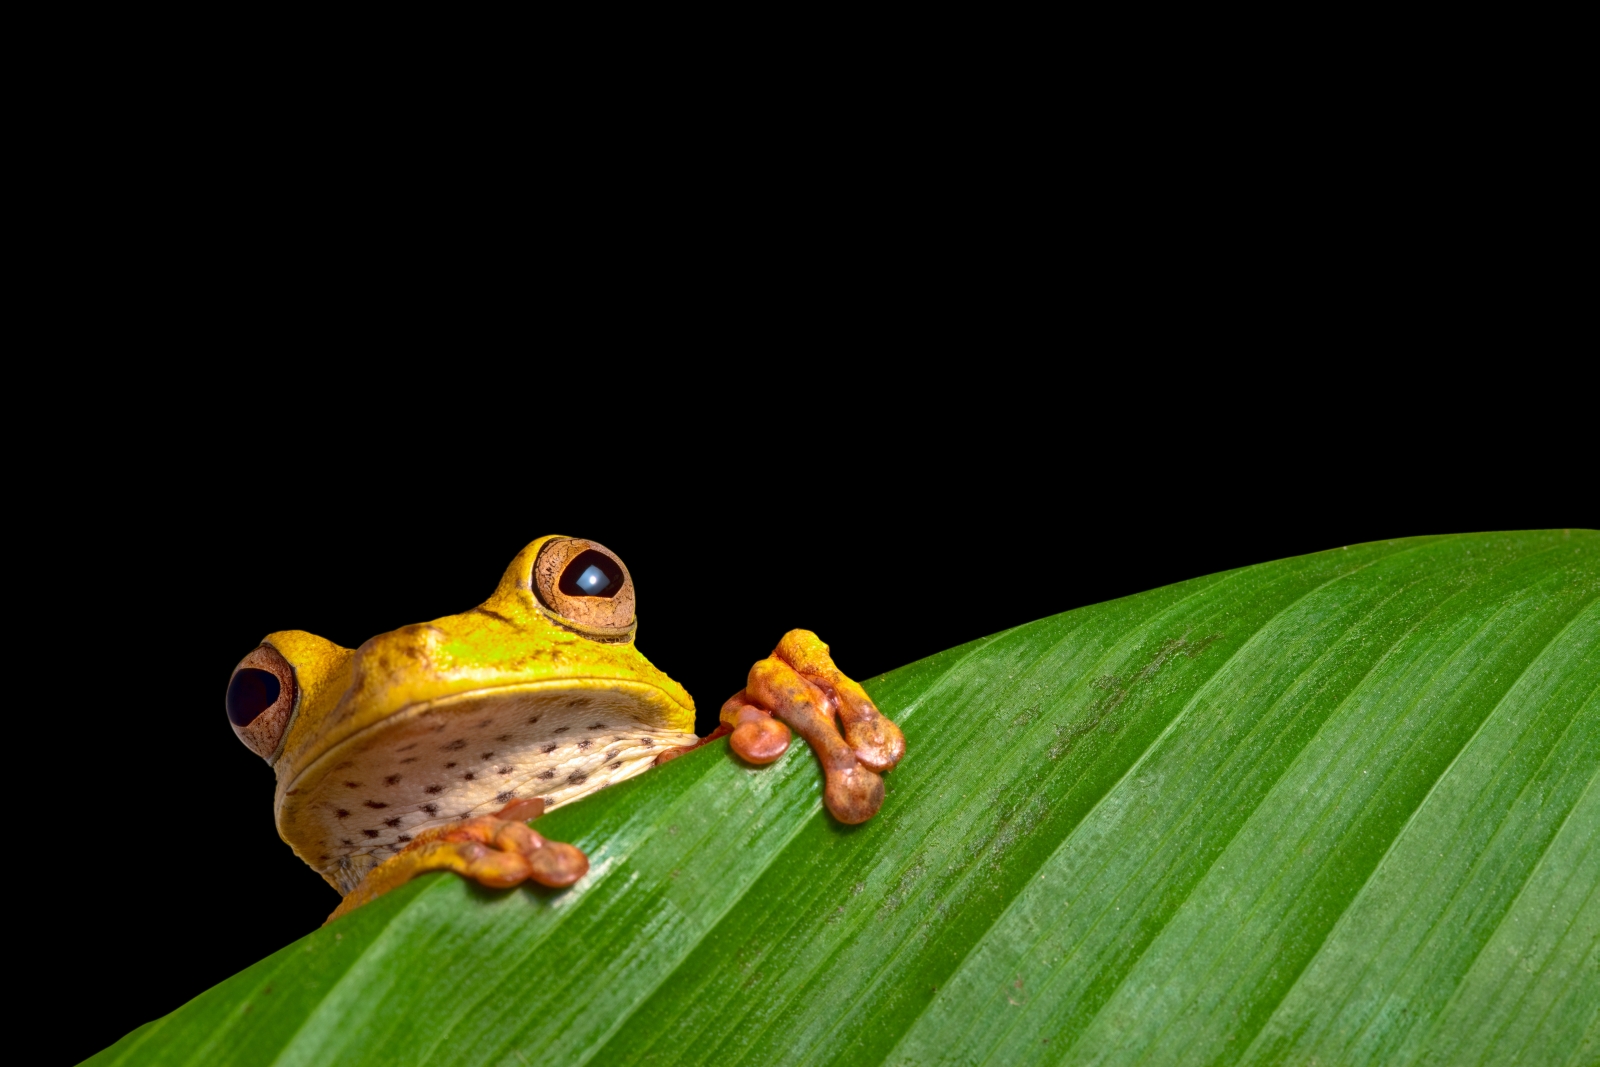 A tree frog in the Amazon, Brazil